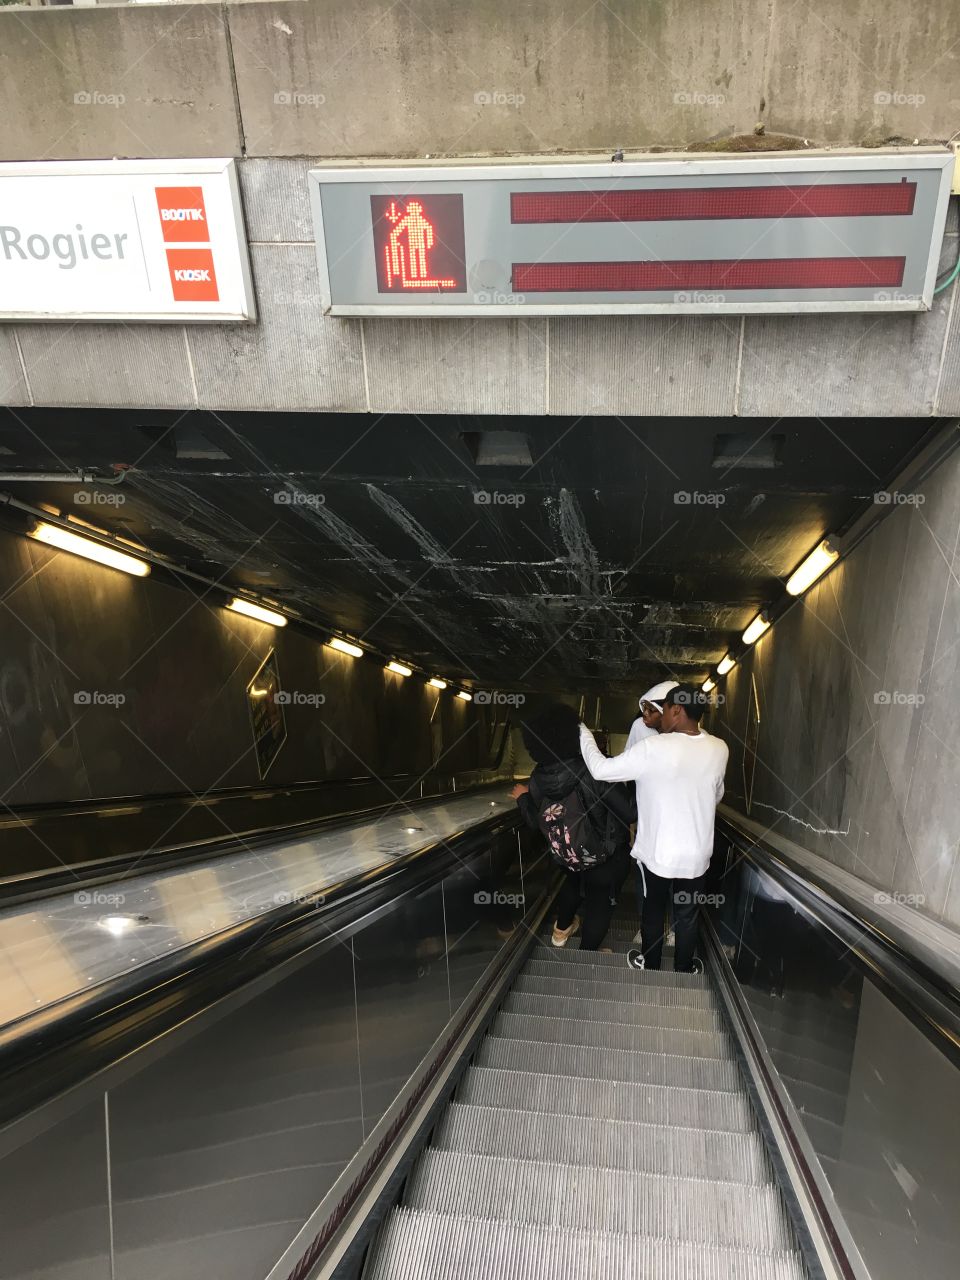 Going down to a Metro stop